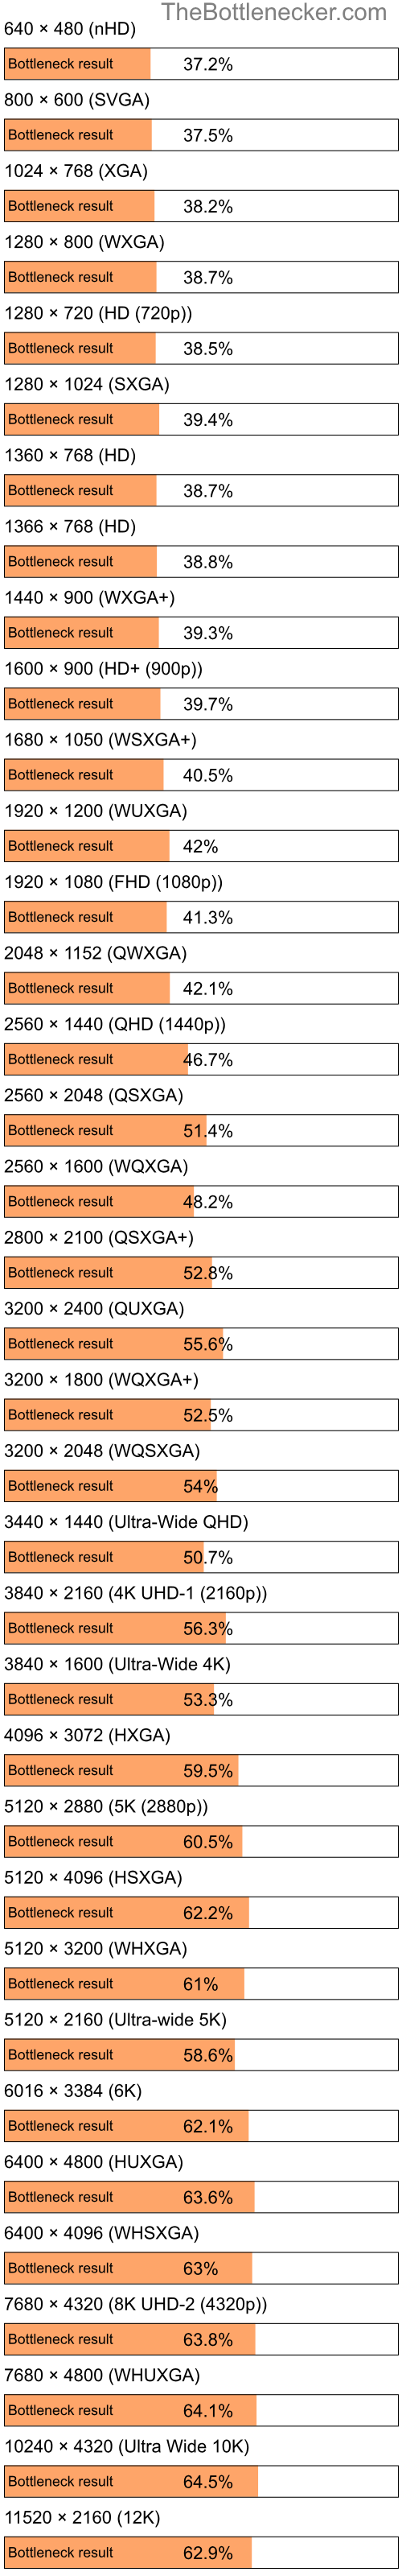 Bottleneck results by resolution for AMD Ryzen 5 7600X and NVIDIA GeForce GTX 1050 Ti in Graphic Card Intense Tasks